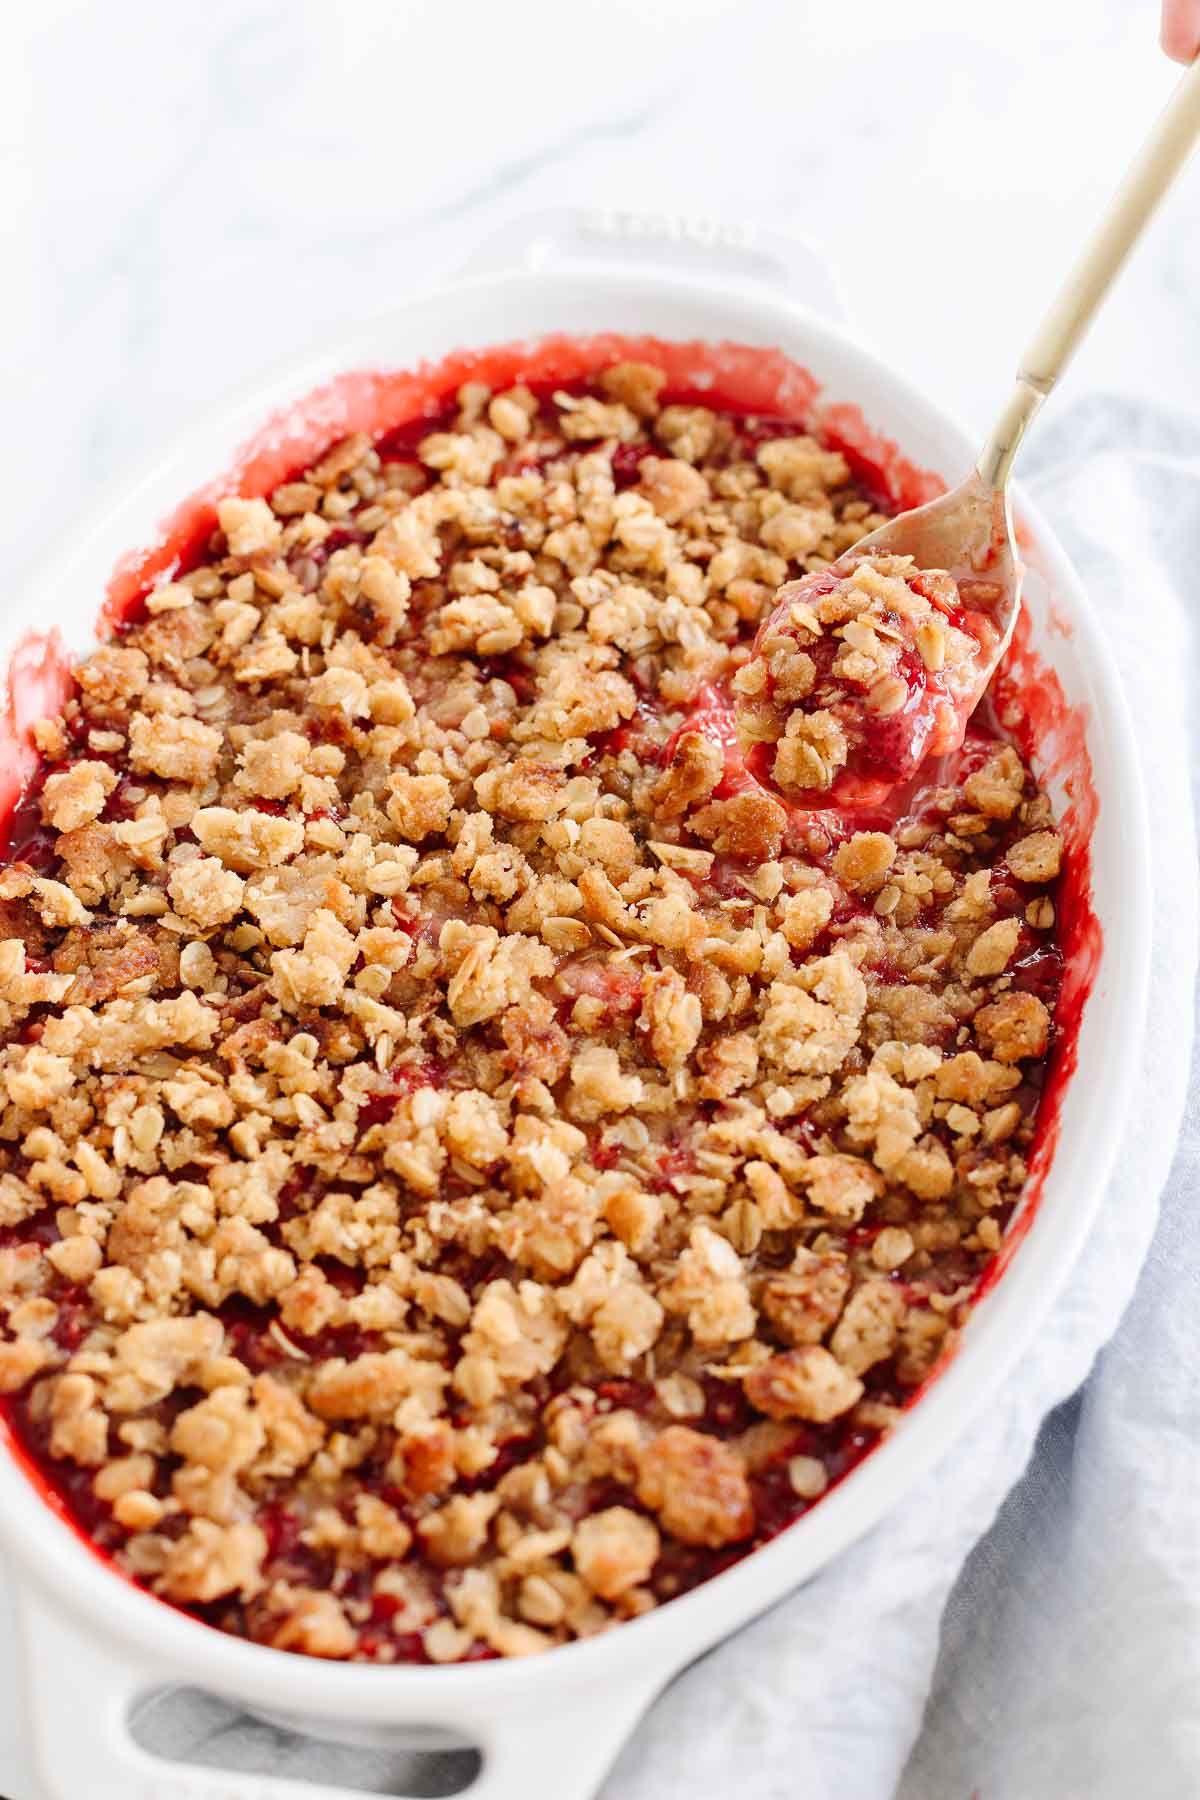 A strawberry crumble in a white oval baking dish